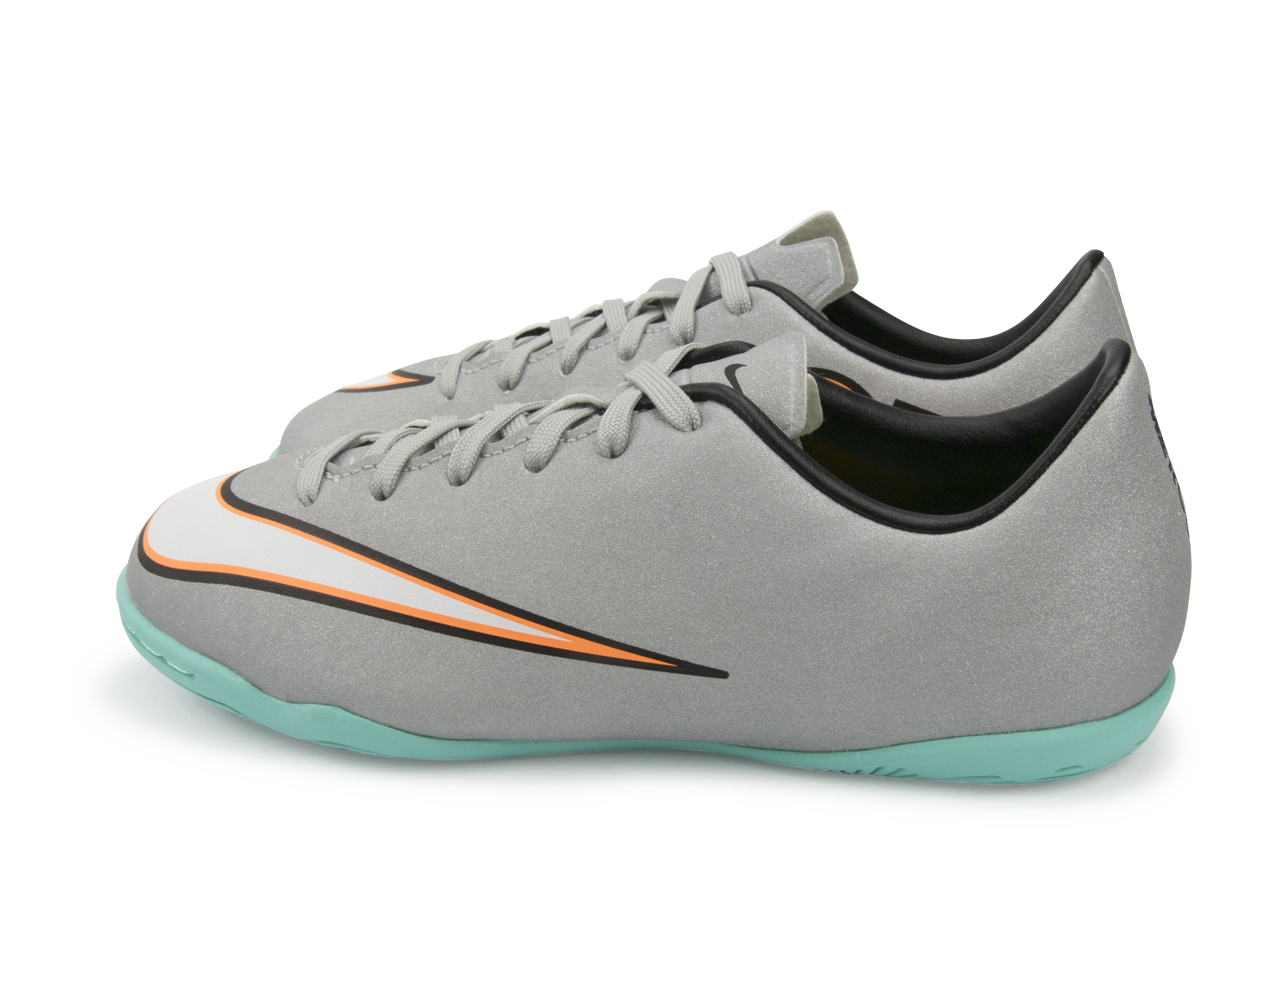 Nike Kids Mercurial Victory V CR Indoor Soccer Shoes Metallic Silver/Hyper Turquoise/Black